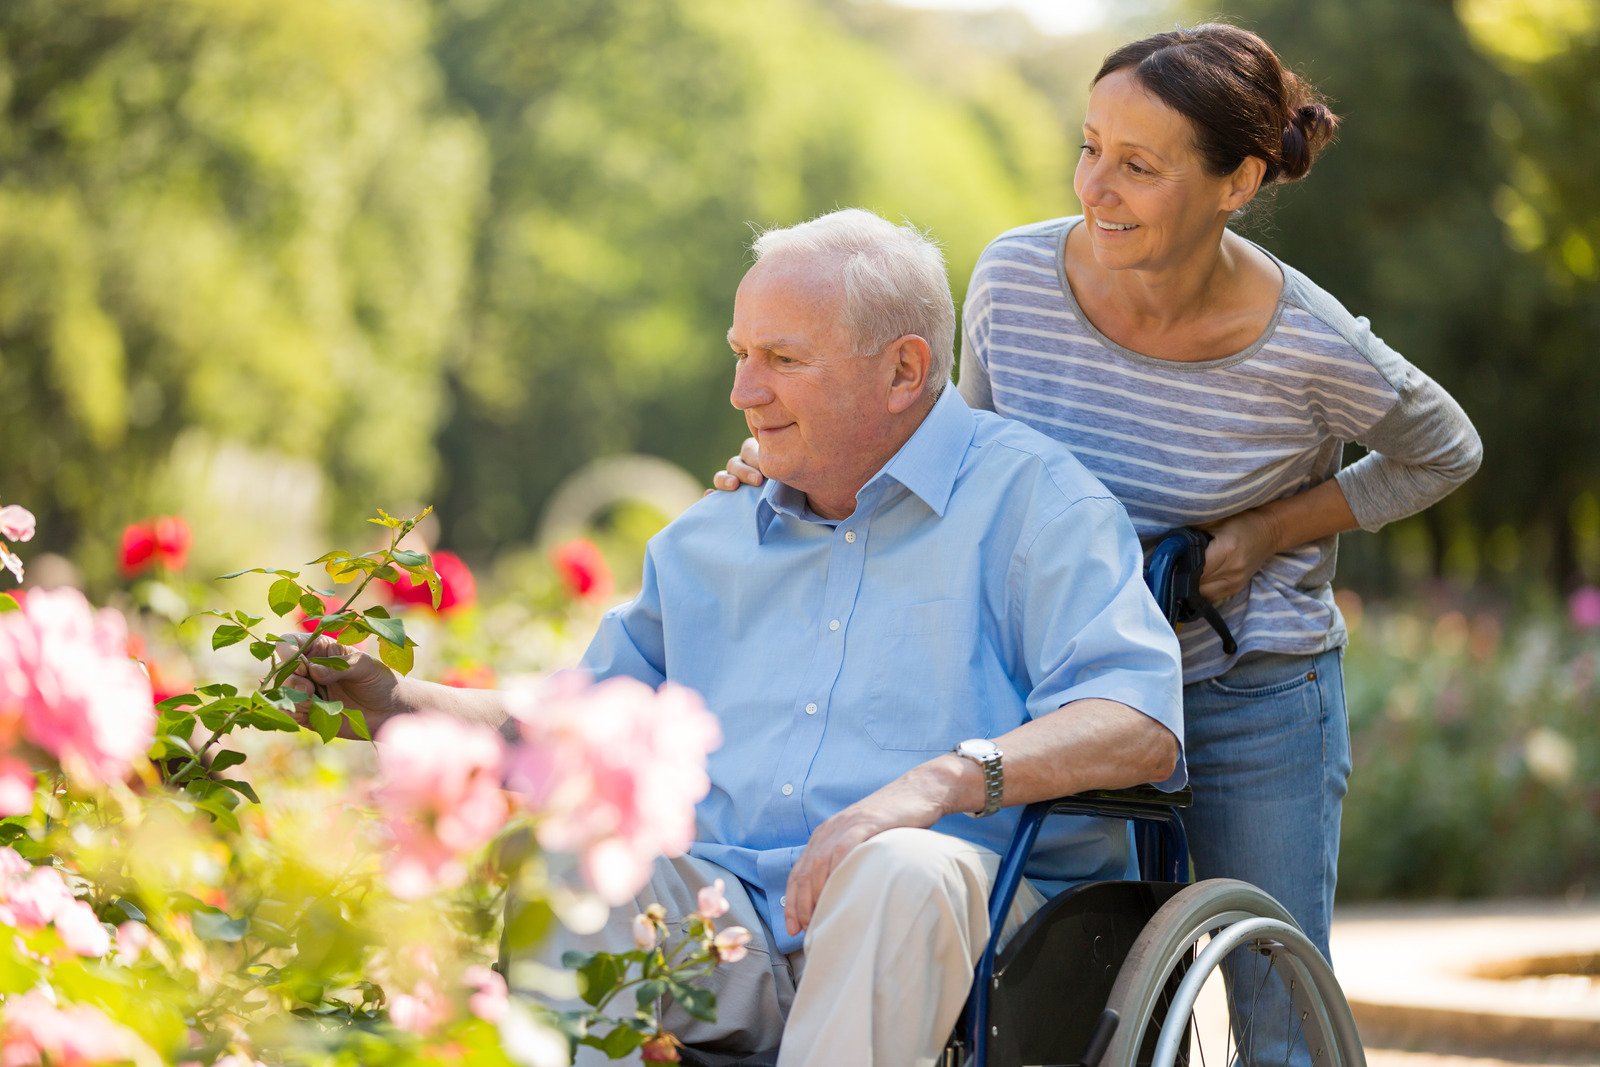 In-Home Health Care Services Provider for Seniors in Houston, The Woodlands, Texas